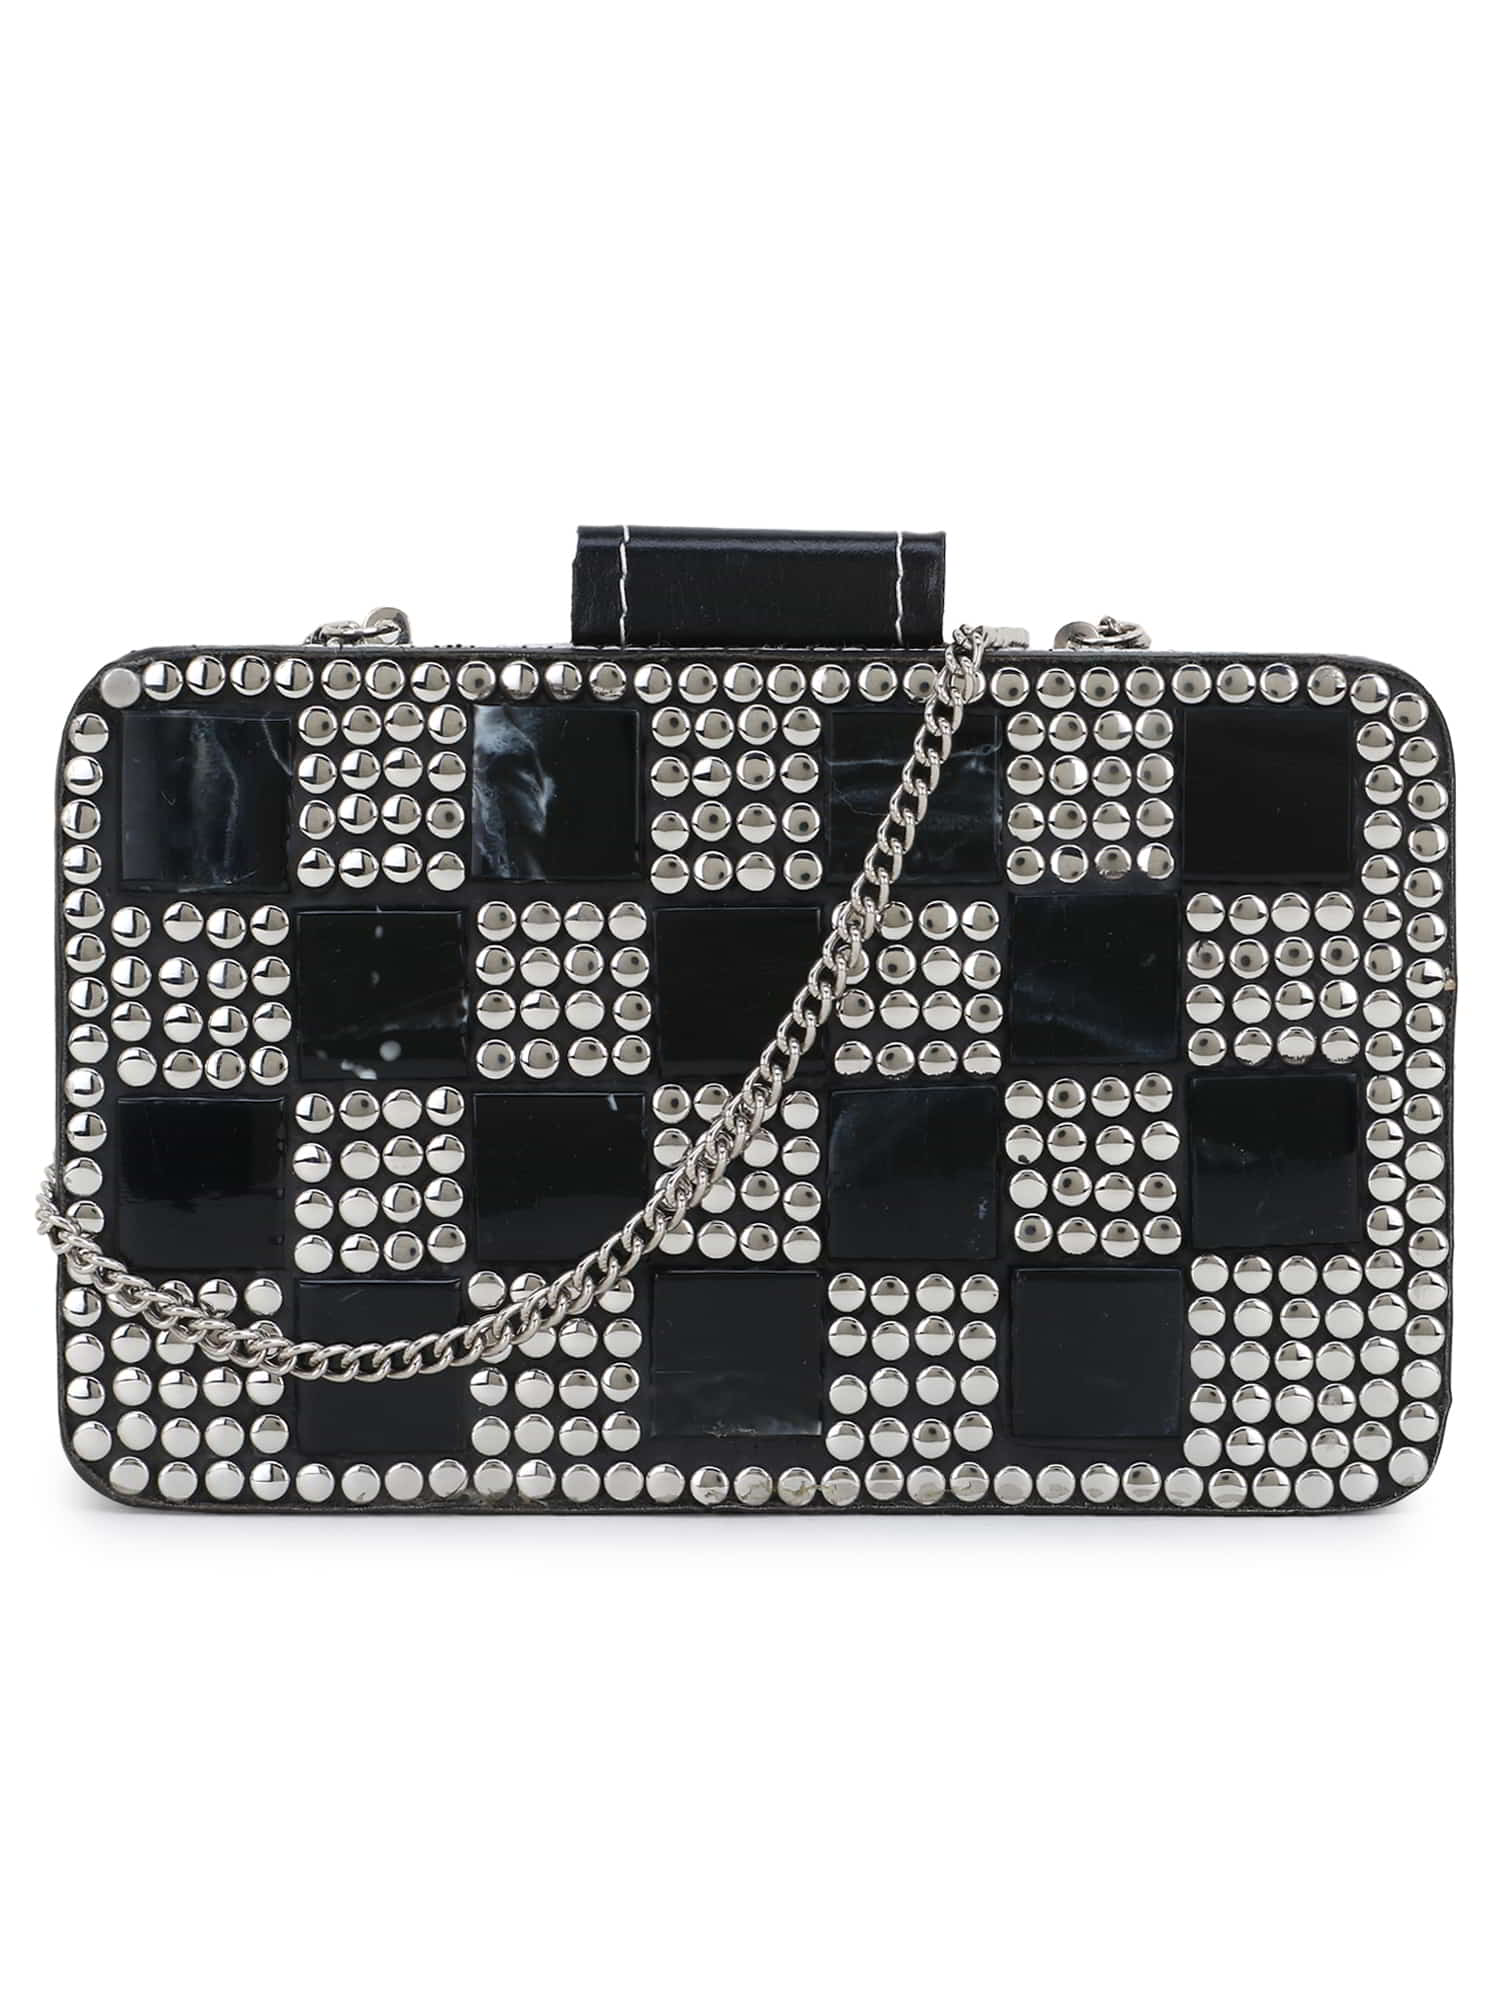 Marble Metal & Fabric Checked Box Clutch